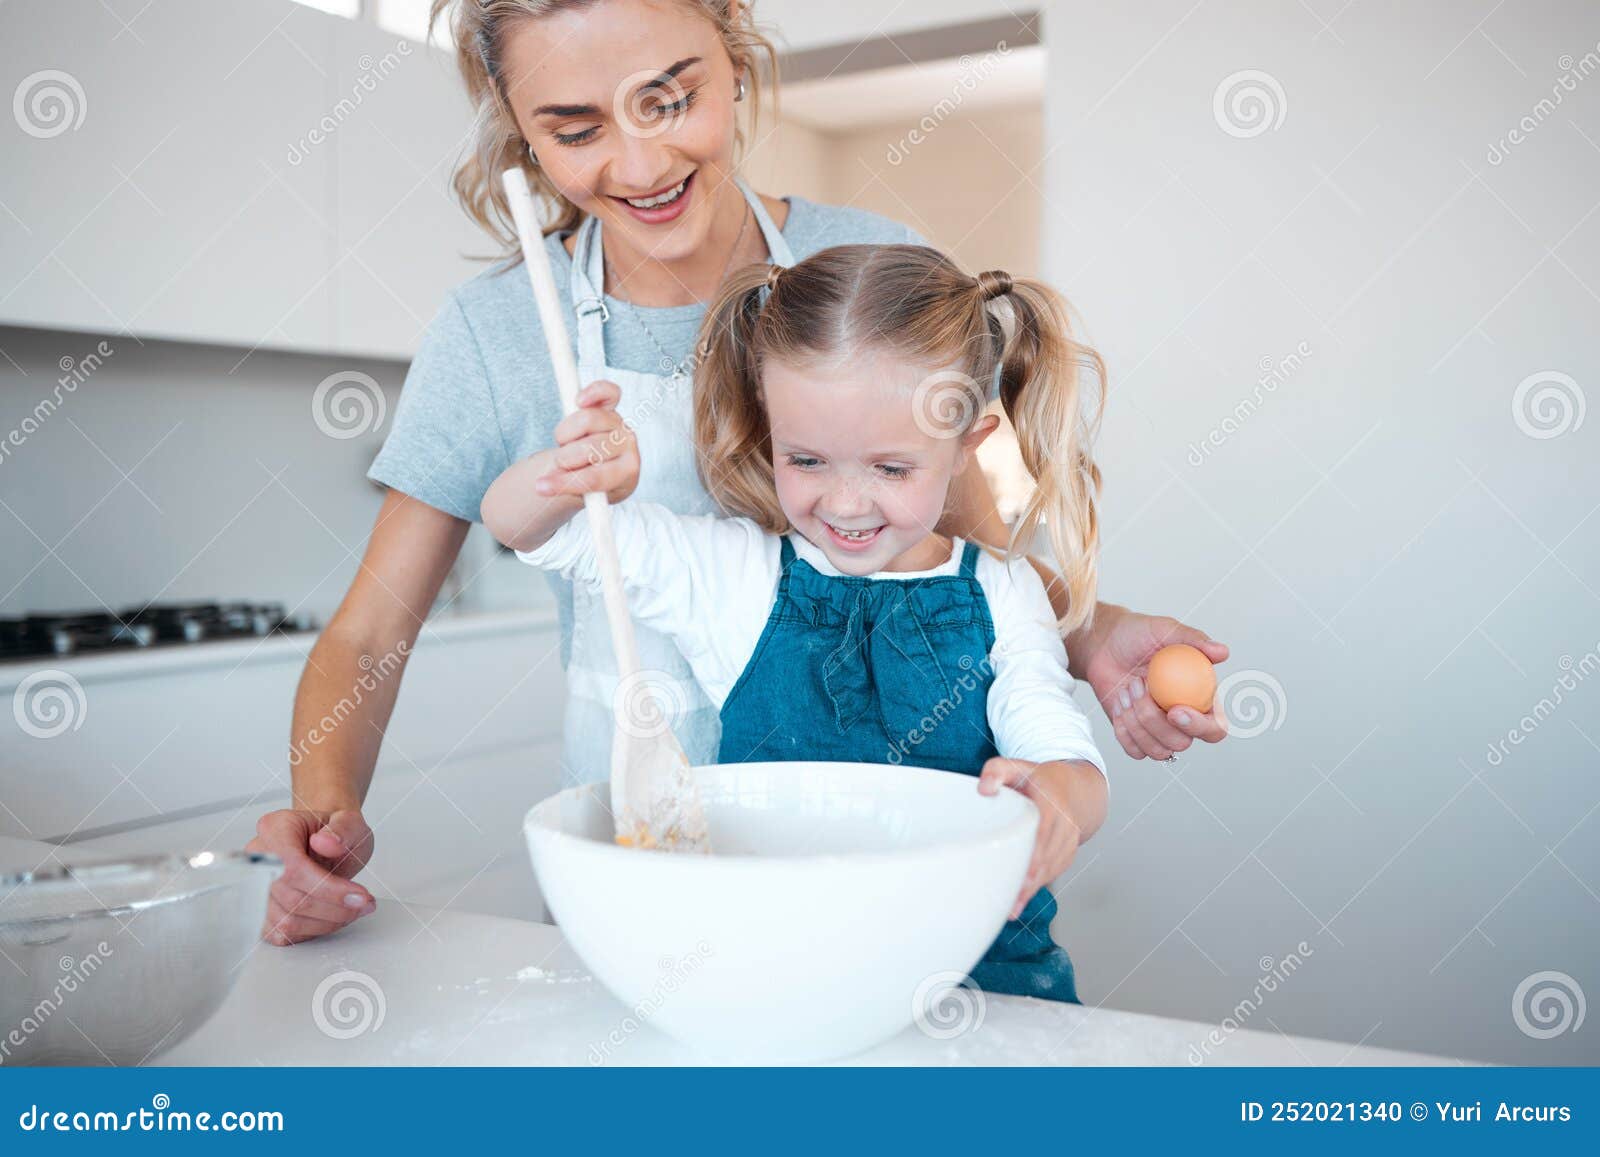 Happy Mother And Daughter Baking And Bonding Young Woman Helping Her Daughter Bake At Home